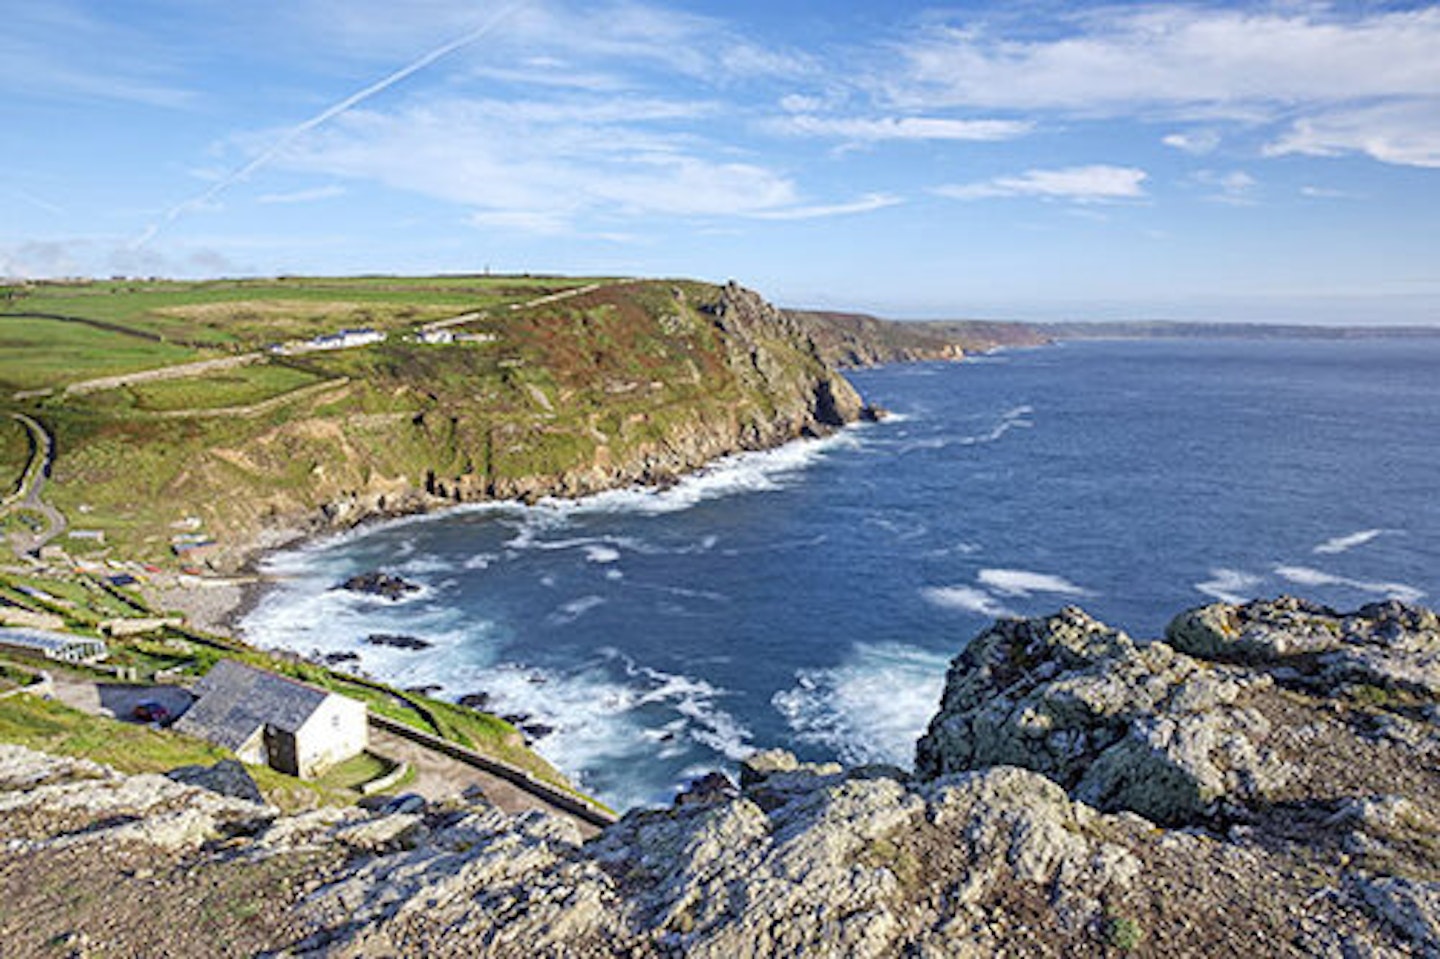 DISCOVER LANDS END, CORNWALL